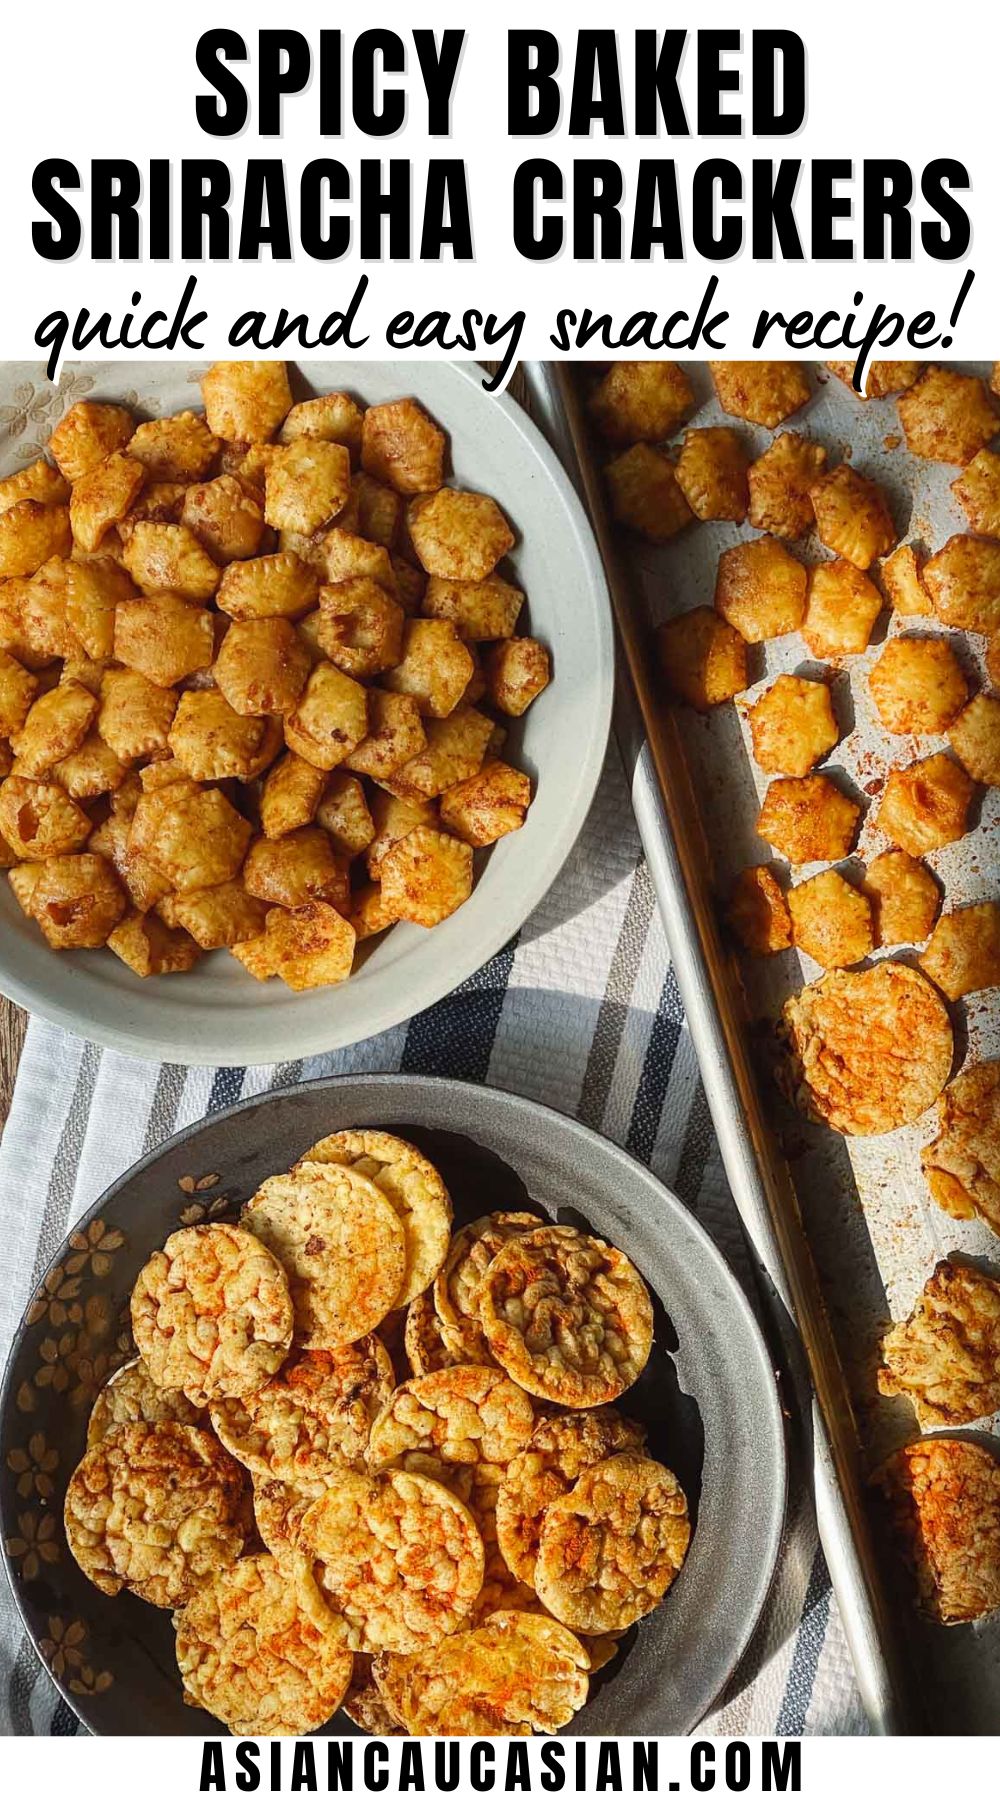 Sriracha popcorn cakes in a gray bowl and Sriracha oyster crackers in a light gray bowl on top of a striped kitchen towel and a baking tray with more crackers on the side.